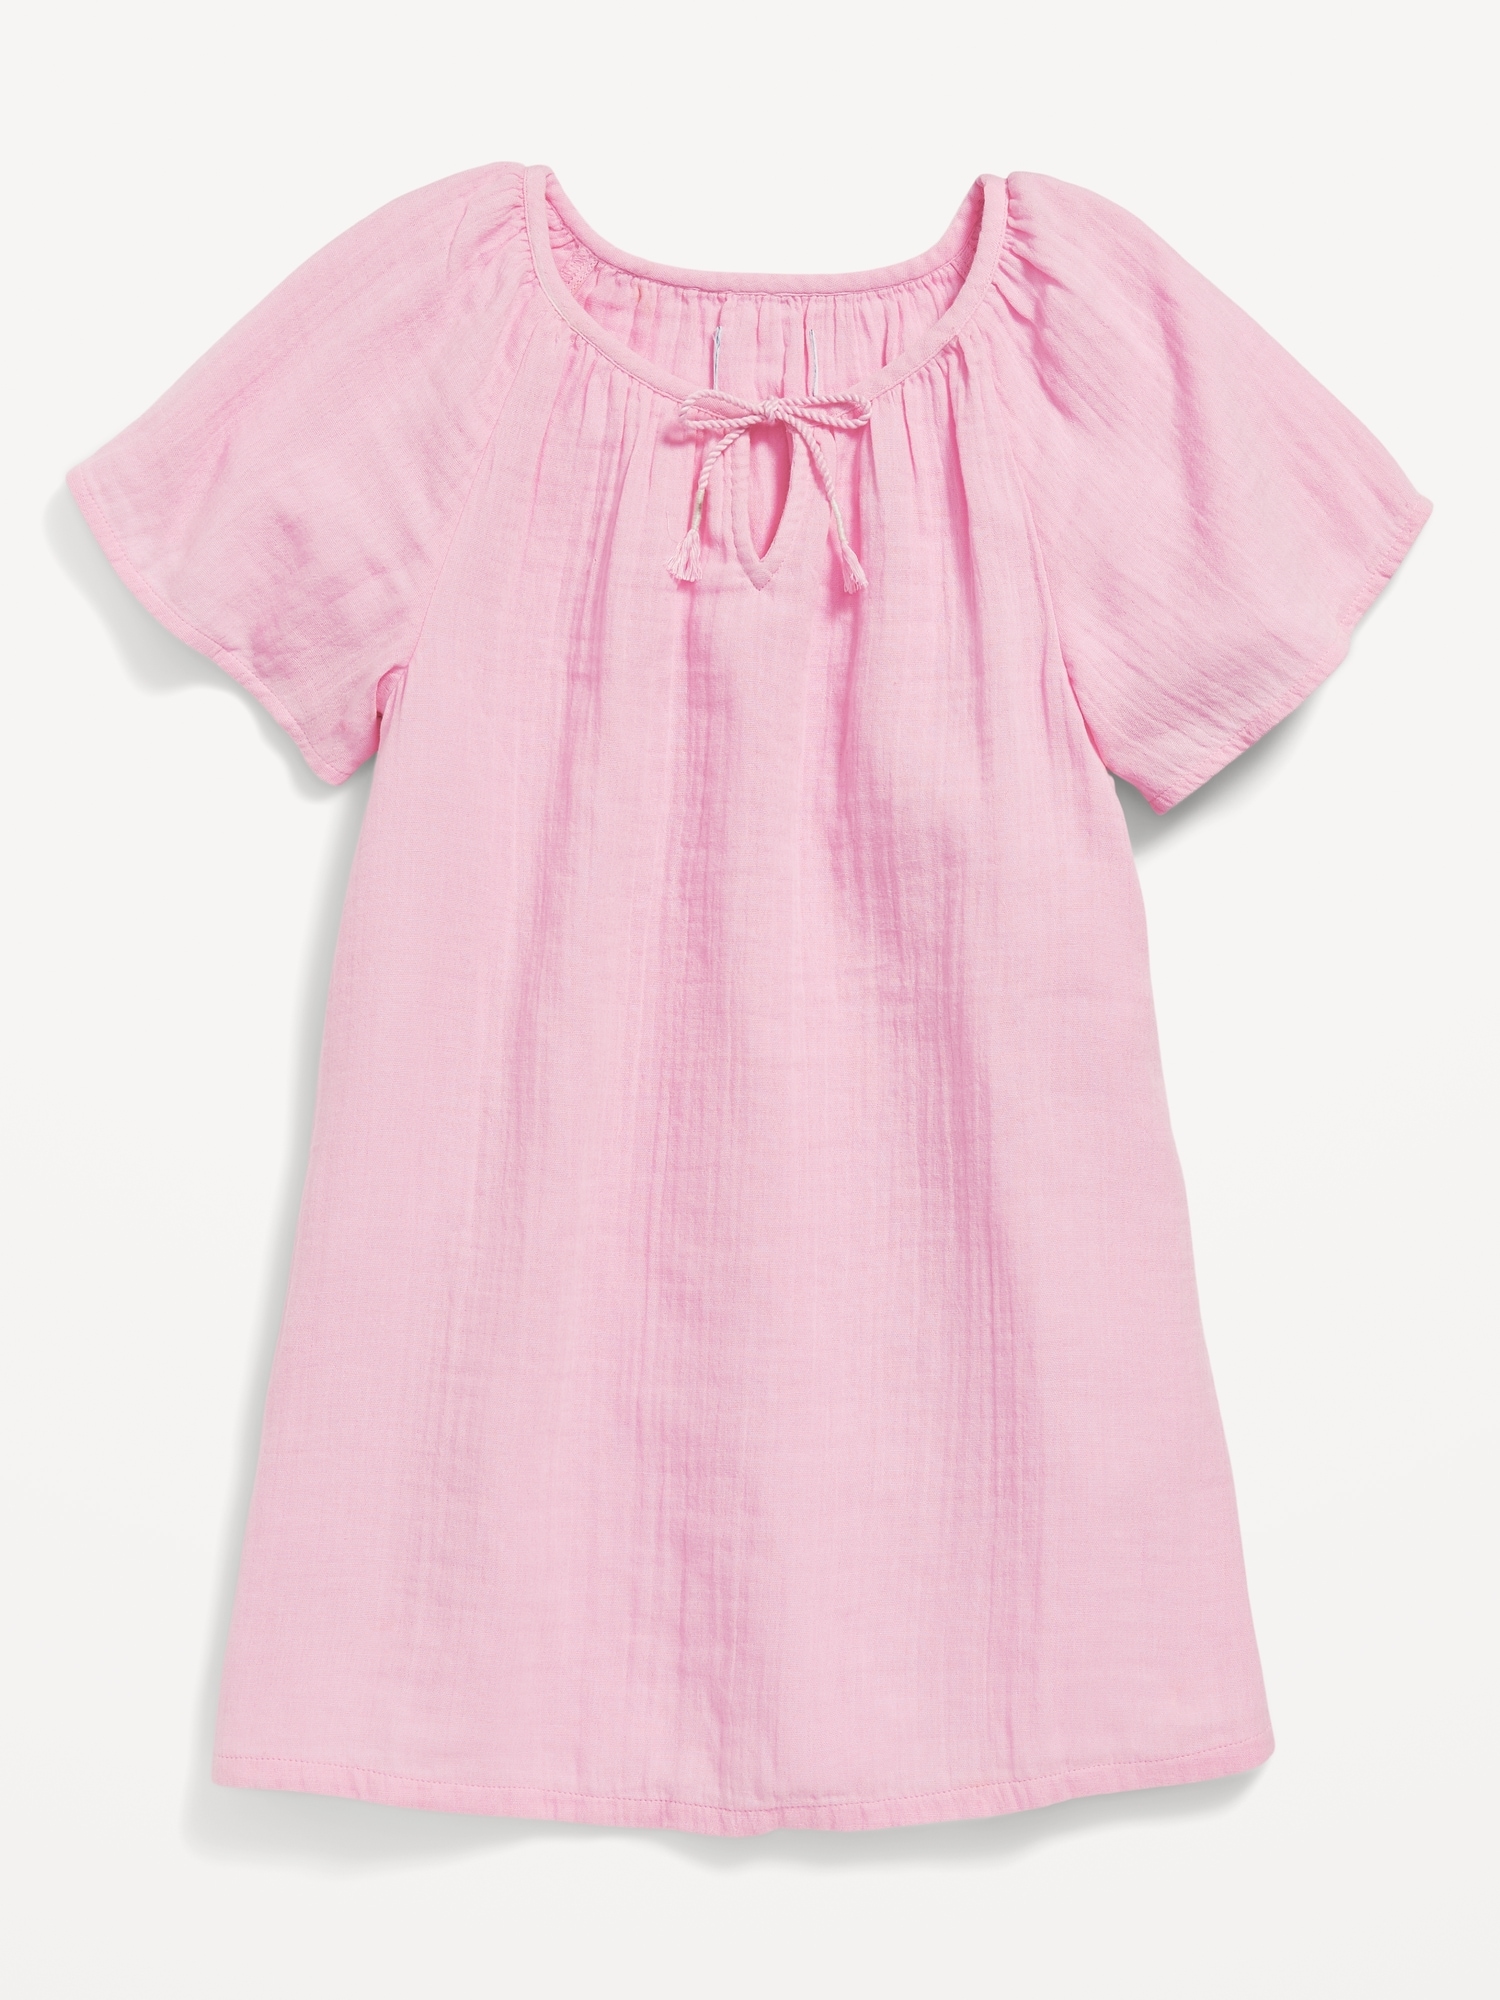 Old Navy Double-Weave Short-Sleeve Tie-Neck Swim Cover-Up Dress for Girls pink. 1